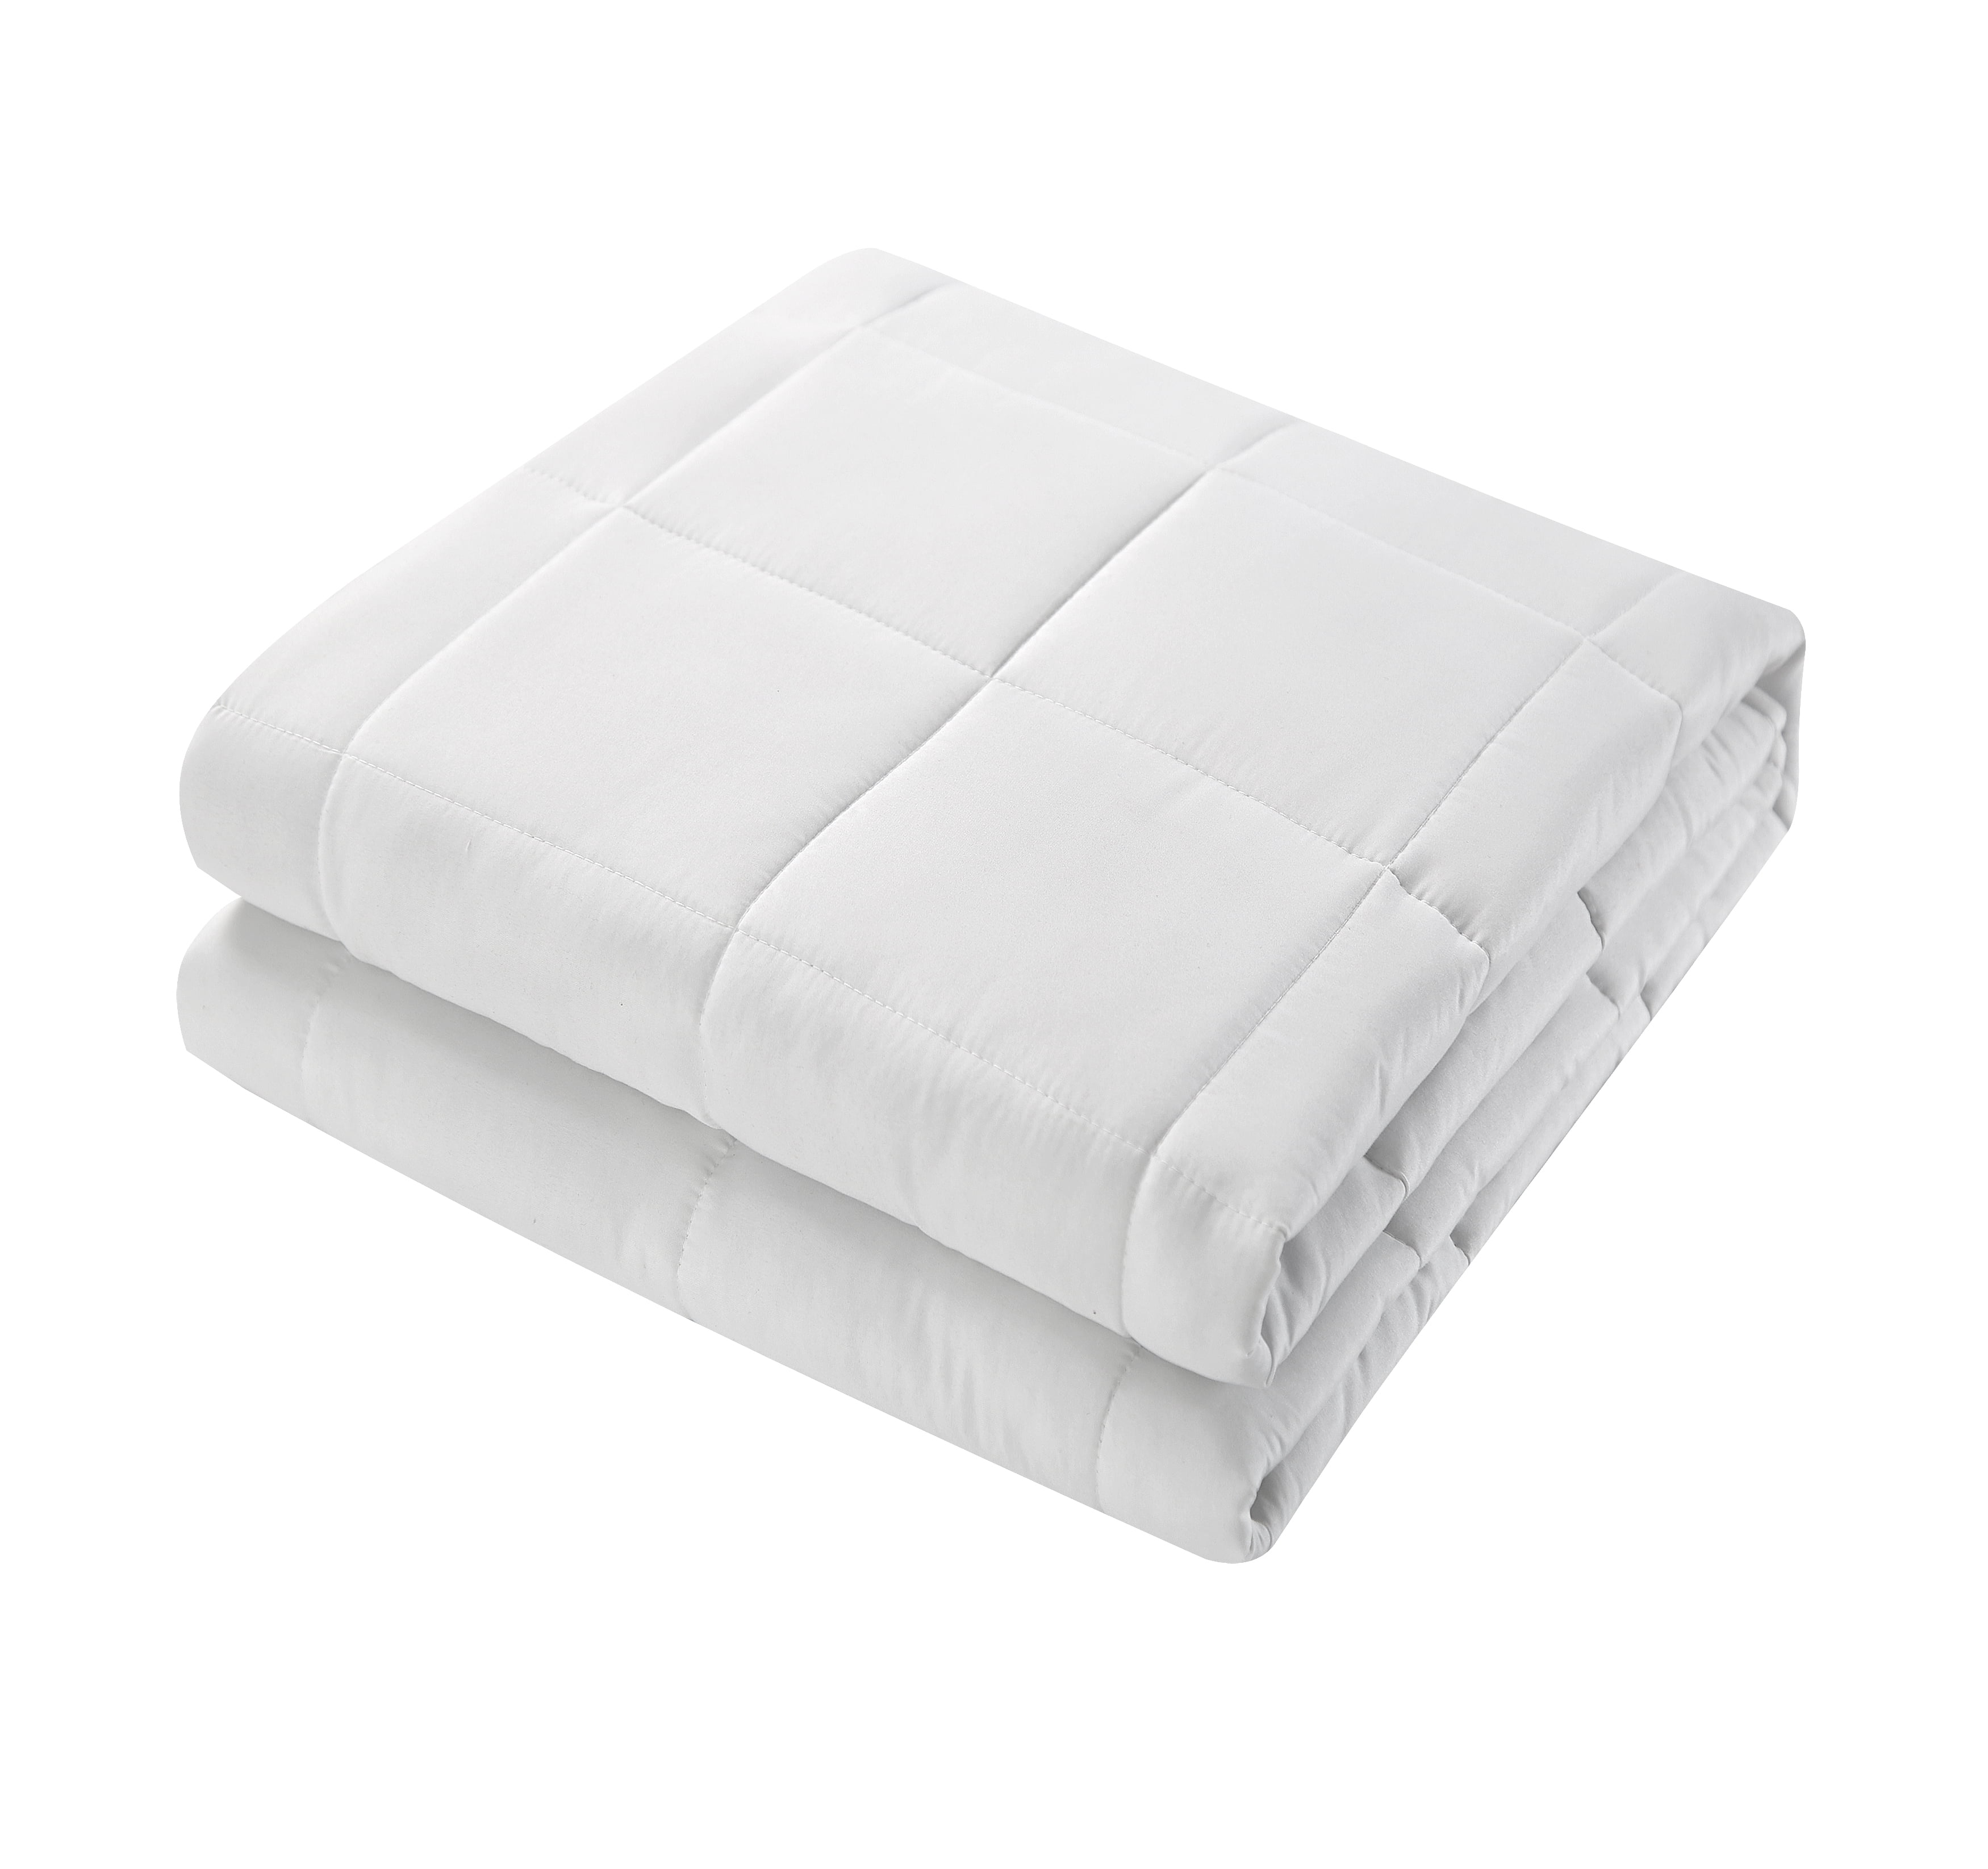 Well Being Soft Weighted Blanket (12lbs, 48"x72", Full Size), White